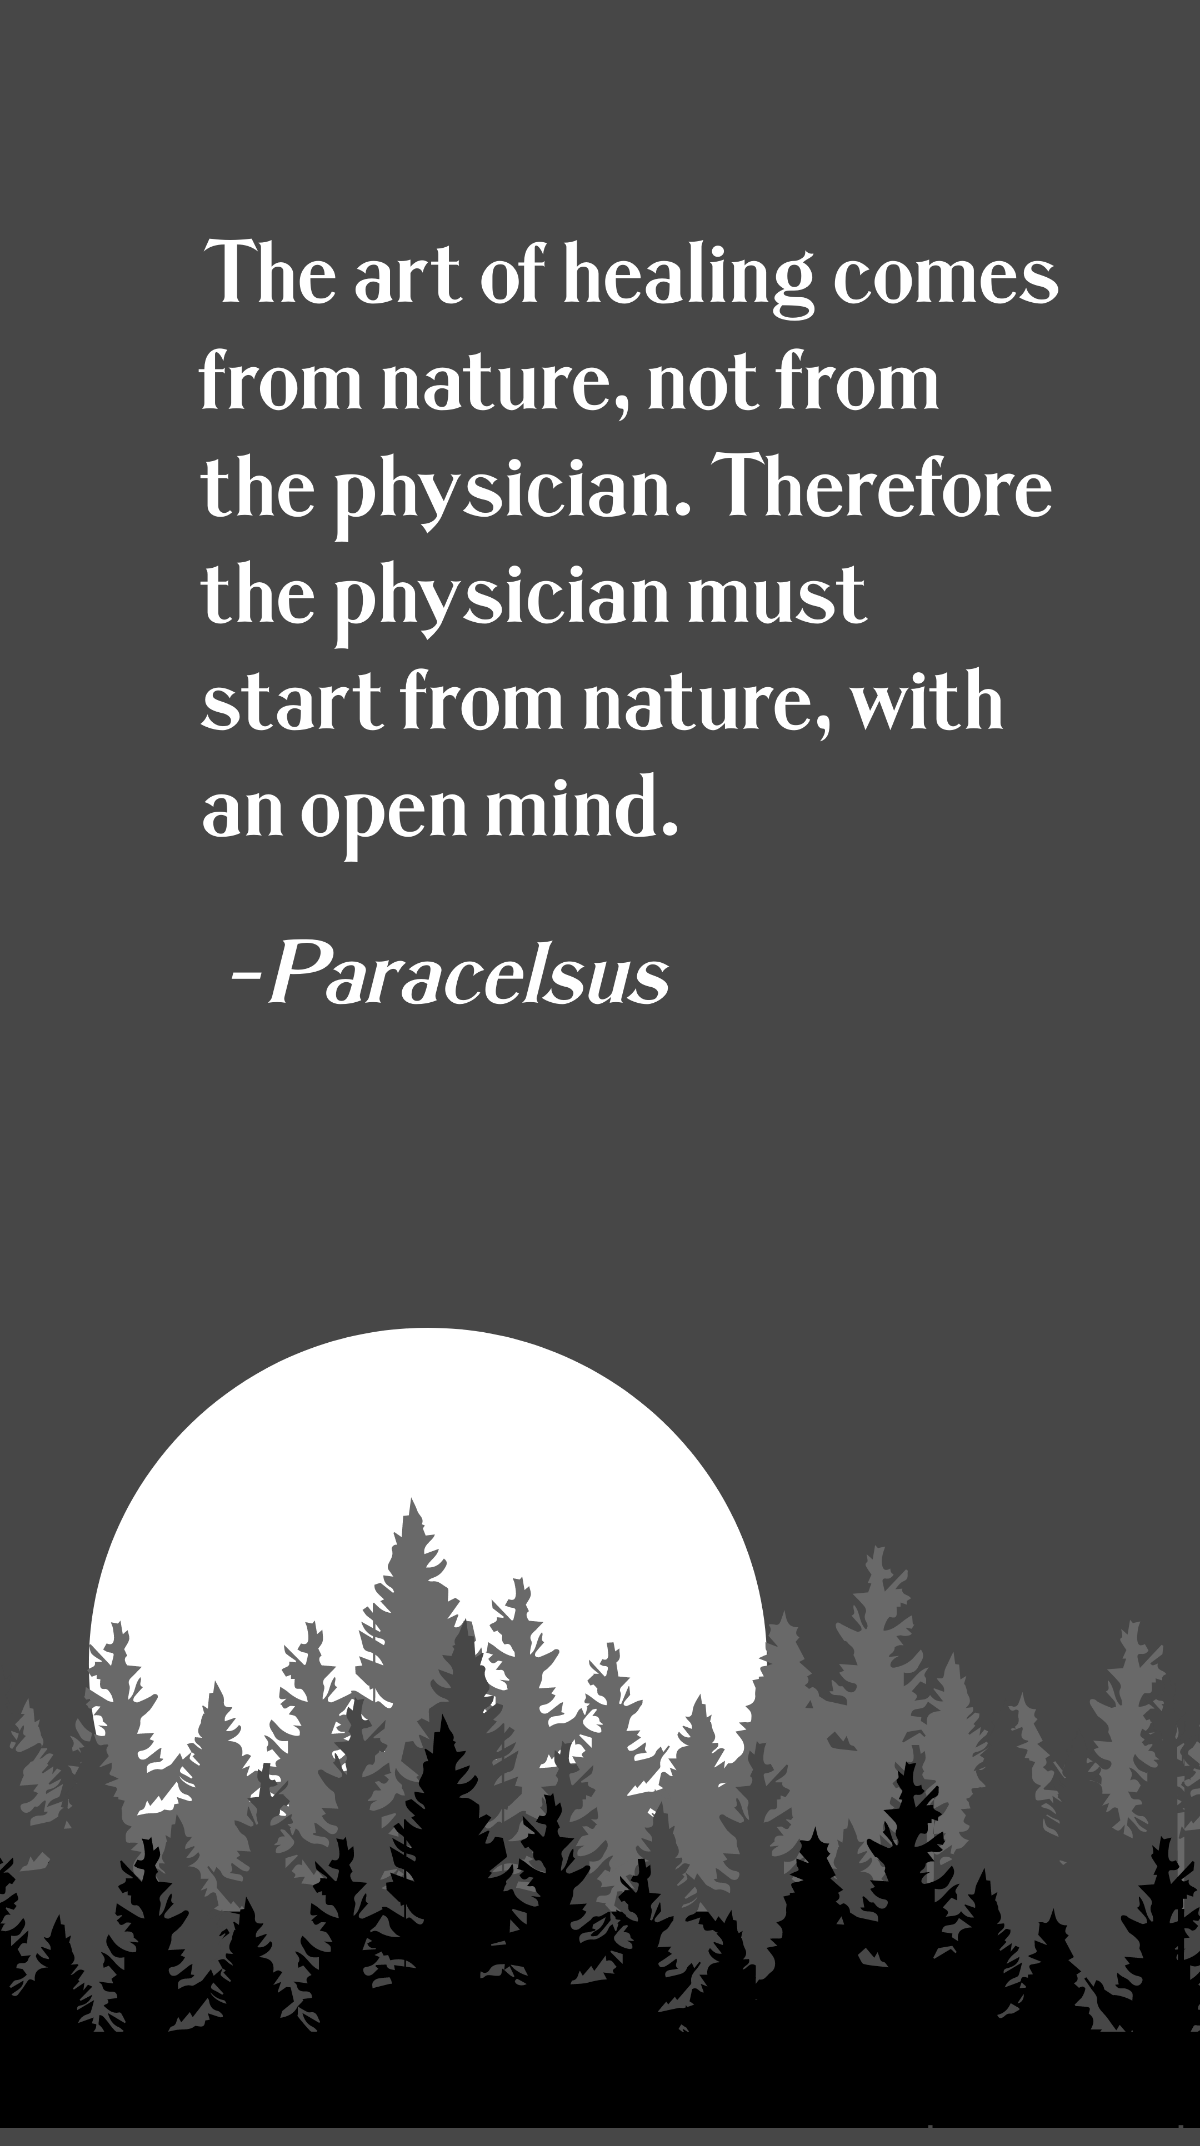 Free Paracelsus - The art of healing comes from nature, not from the physician. Therefore the physician must start from nature, with an open mind. Template